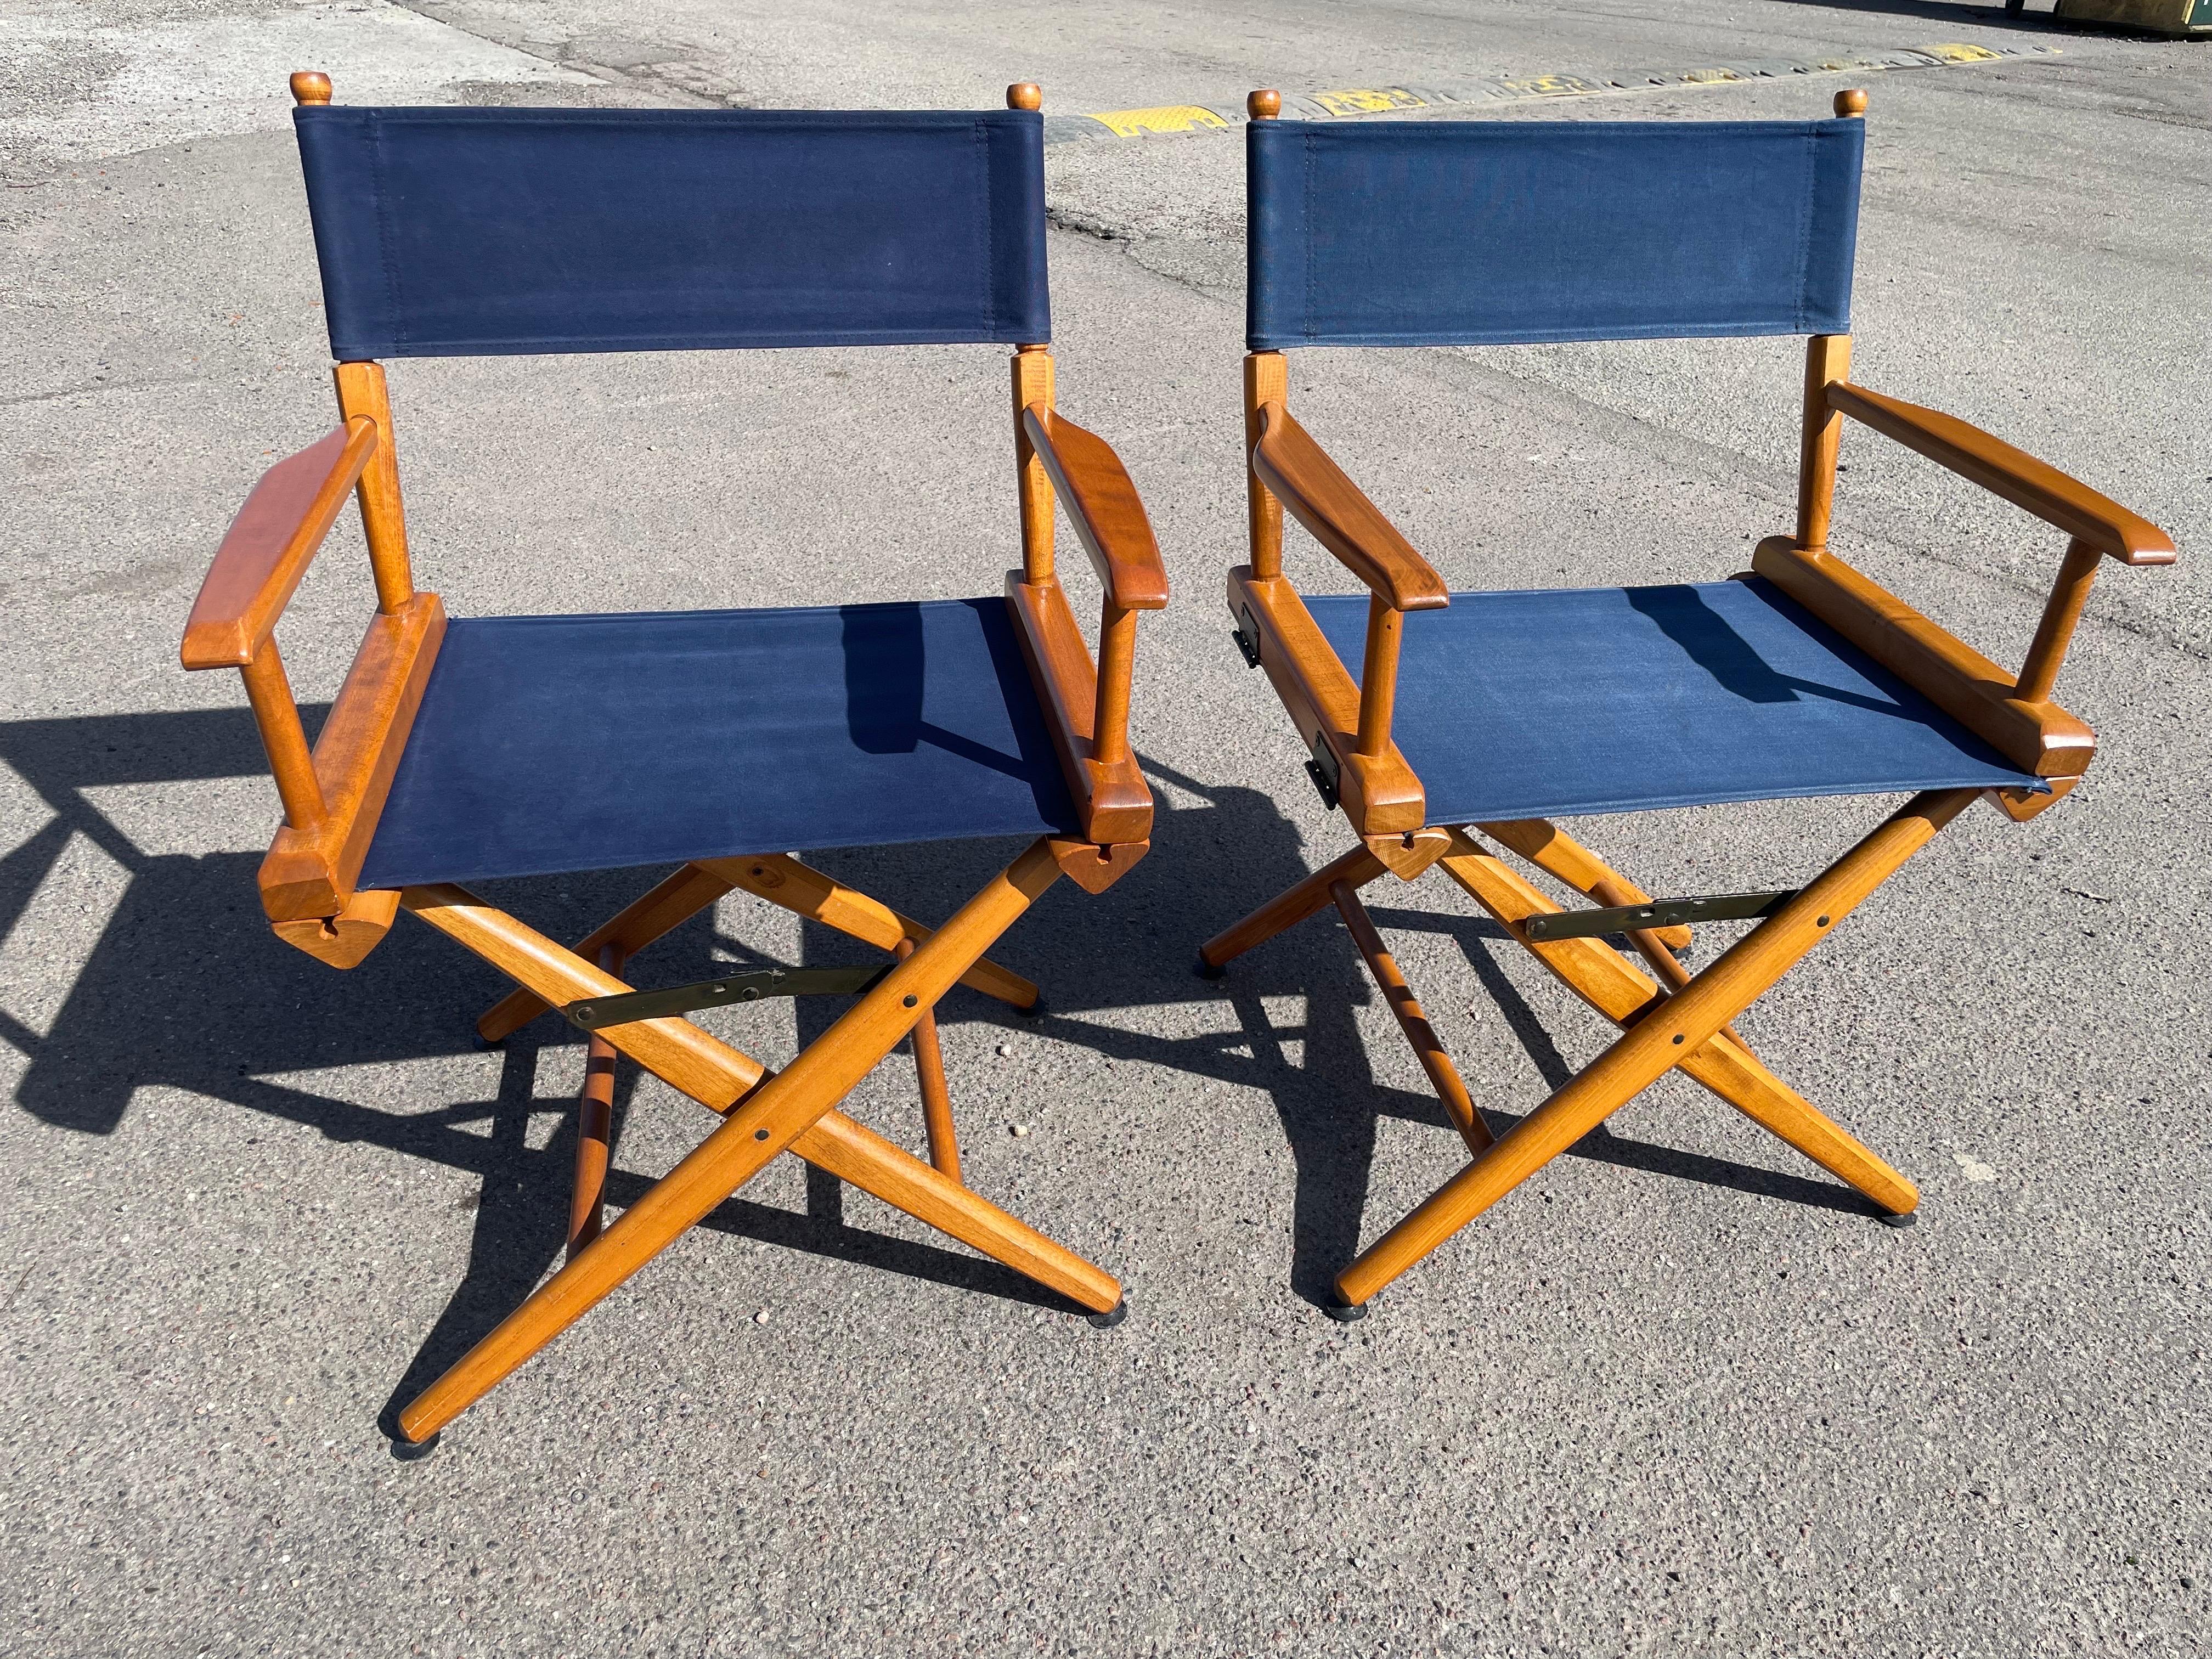 A beautiful pair of director chairs In pristine original condition, they are a testament to their enduring quality, meticulously maintained and waiting to enhance your leisure moments. With a nod to the 1970s design aesthetic, these chairs are